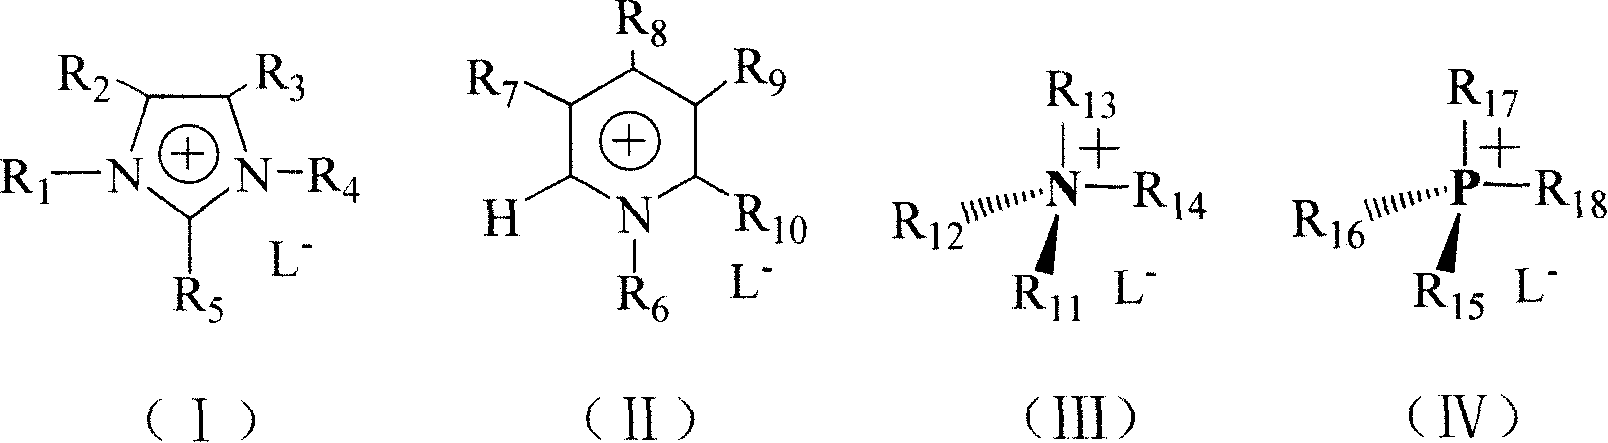 Production method for lodixanol hydrolysate